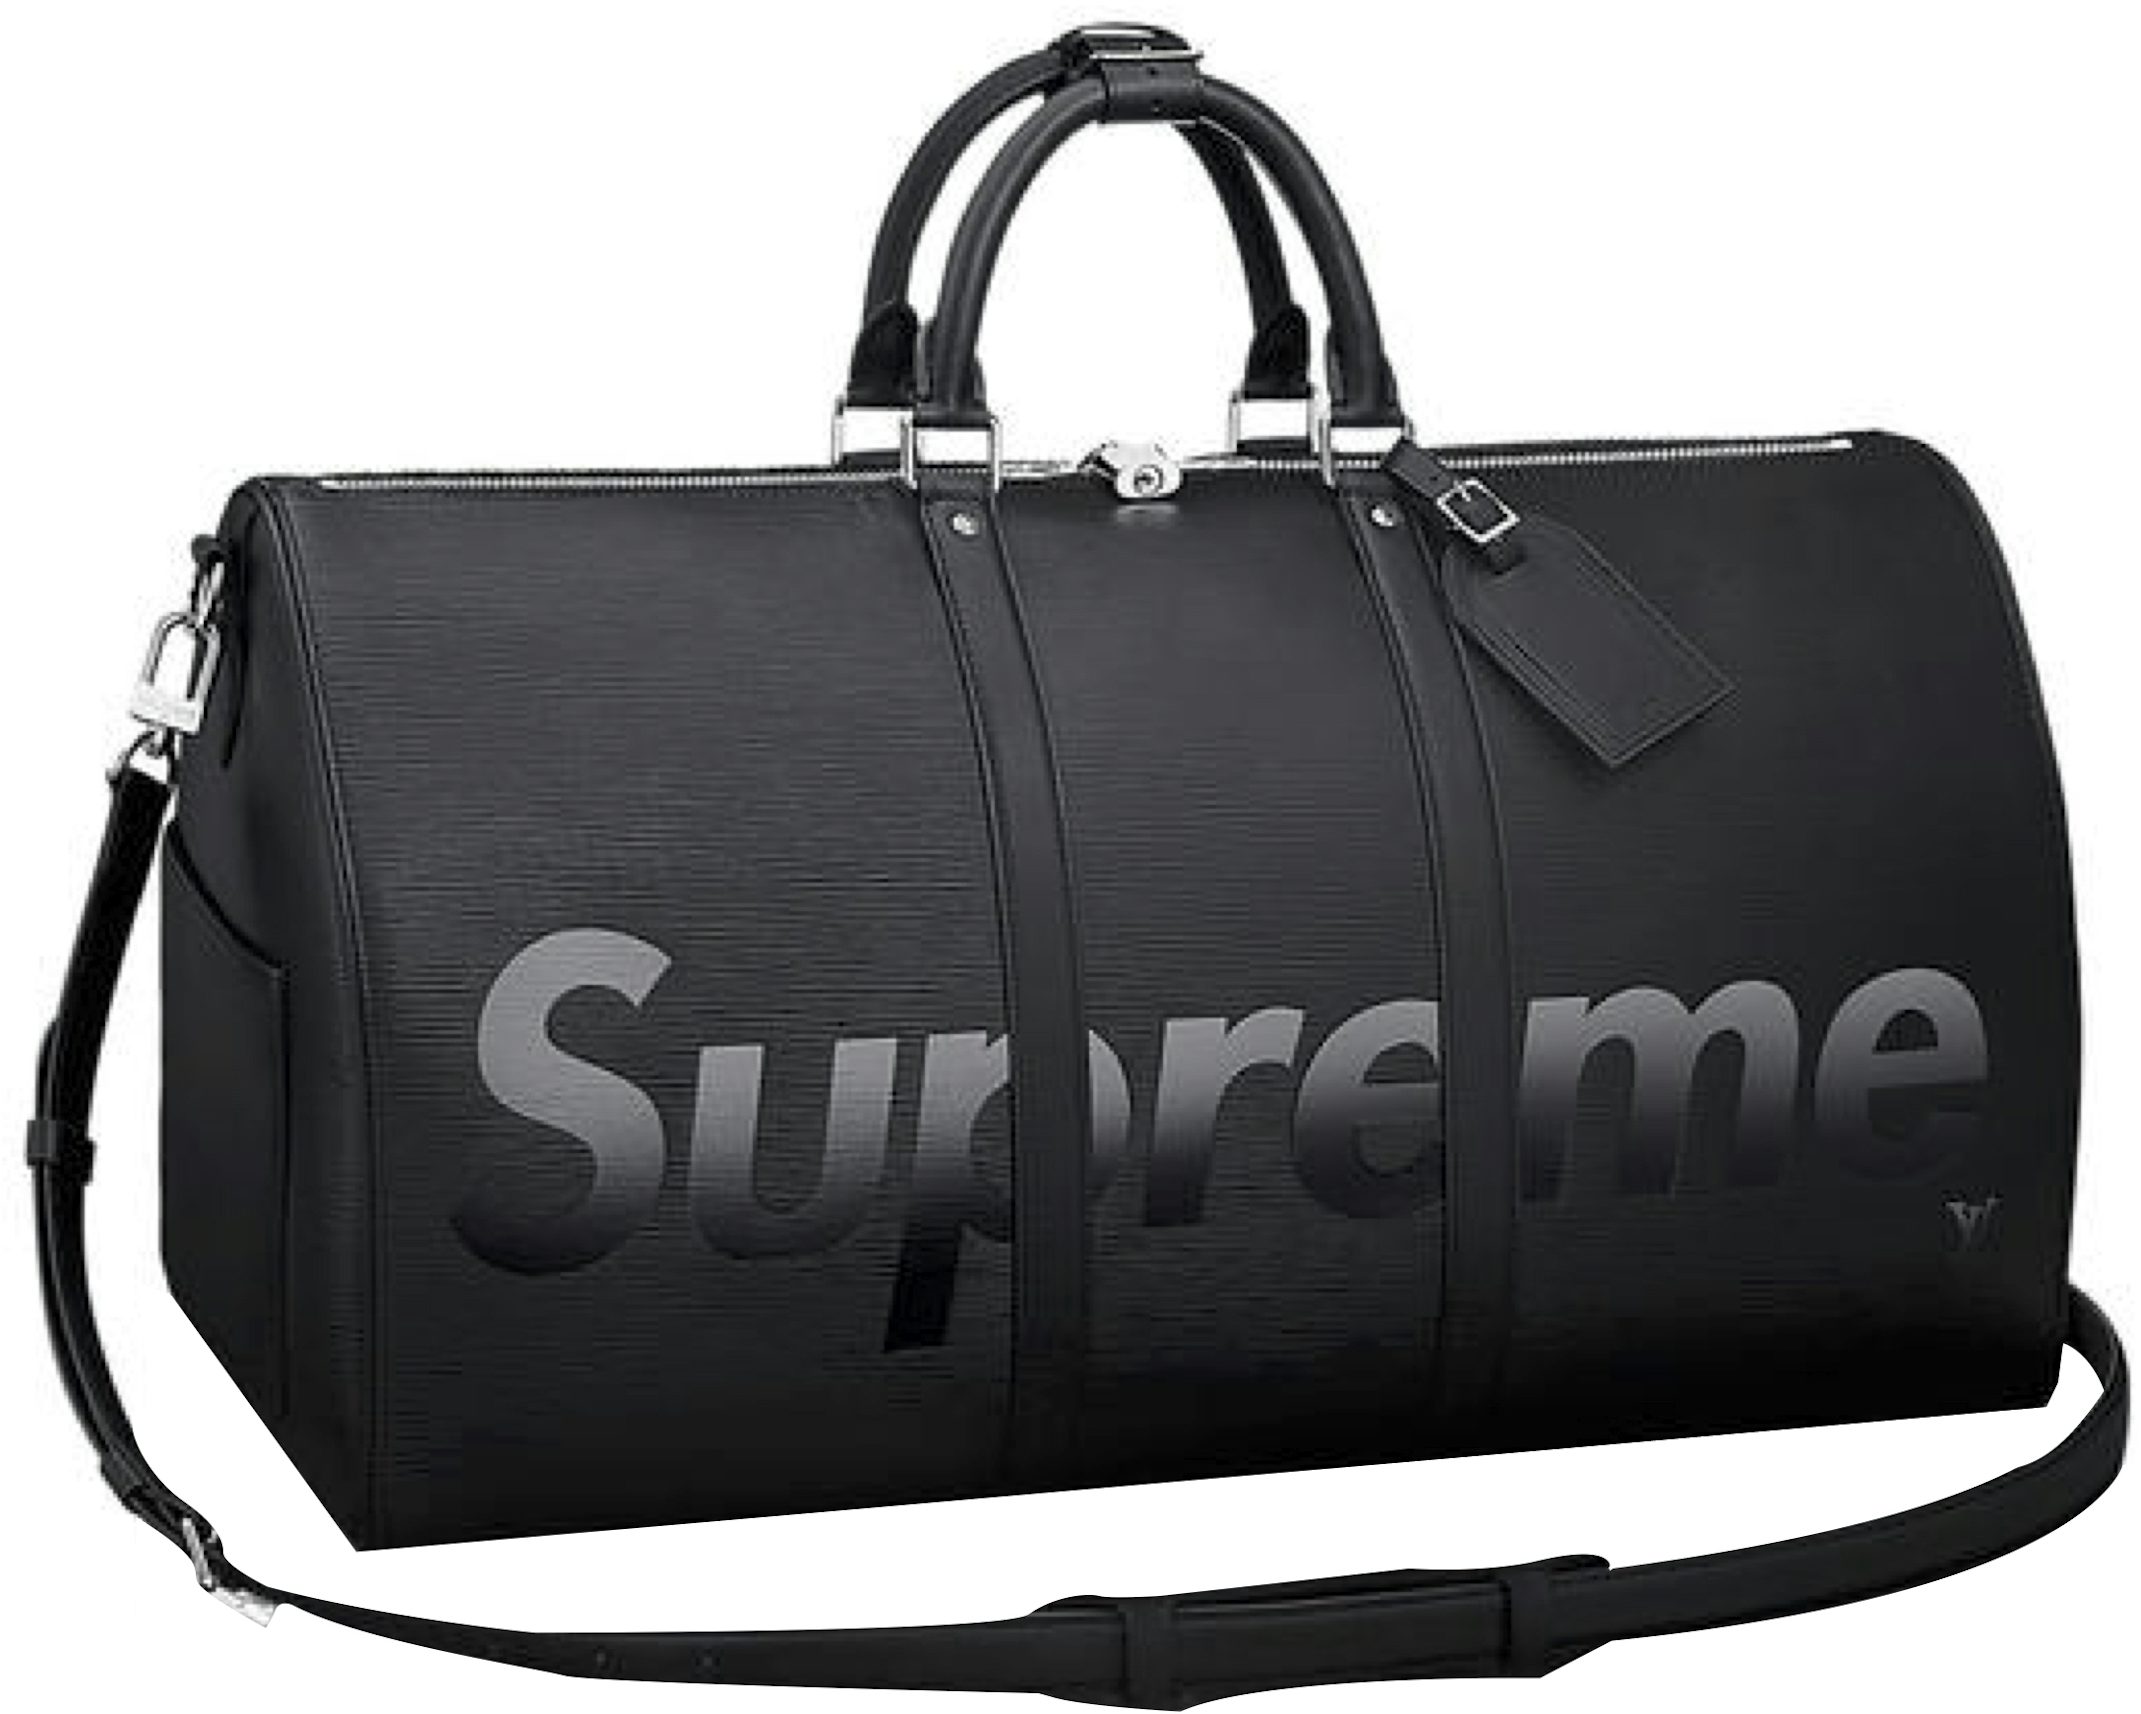 How To Spot Fake Supreme x Louis Vuitton Backpacks